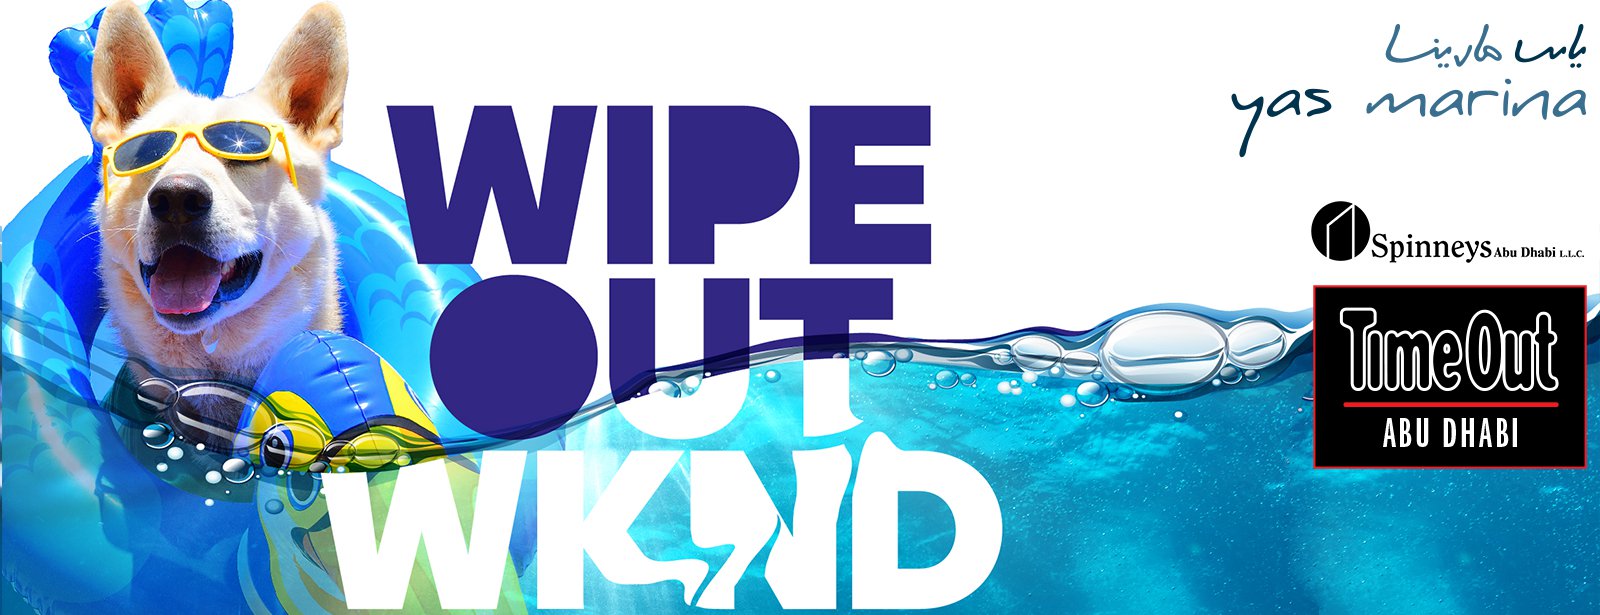 Wipeout WKND at Yas Marina - Coming Soon in UAE